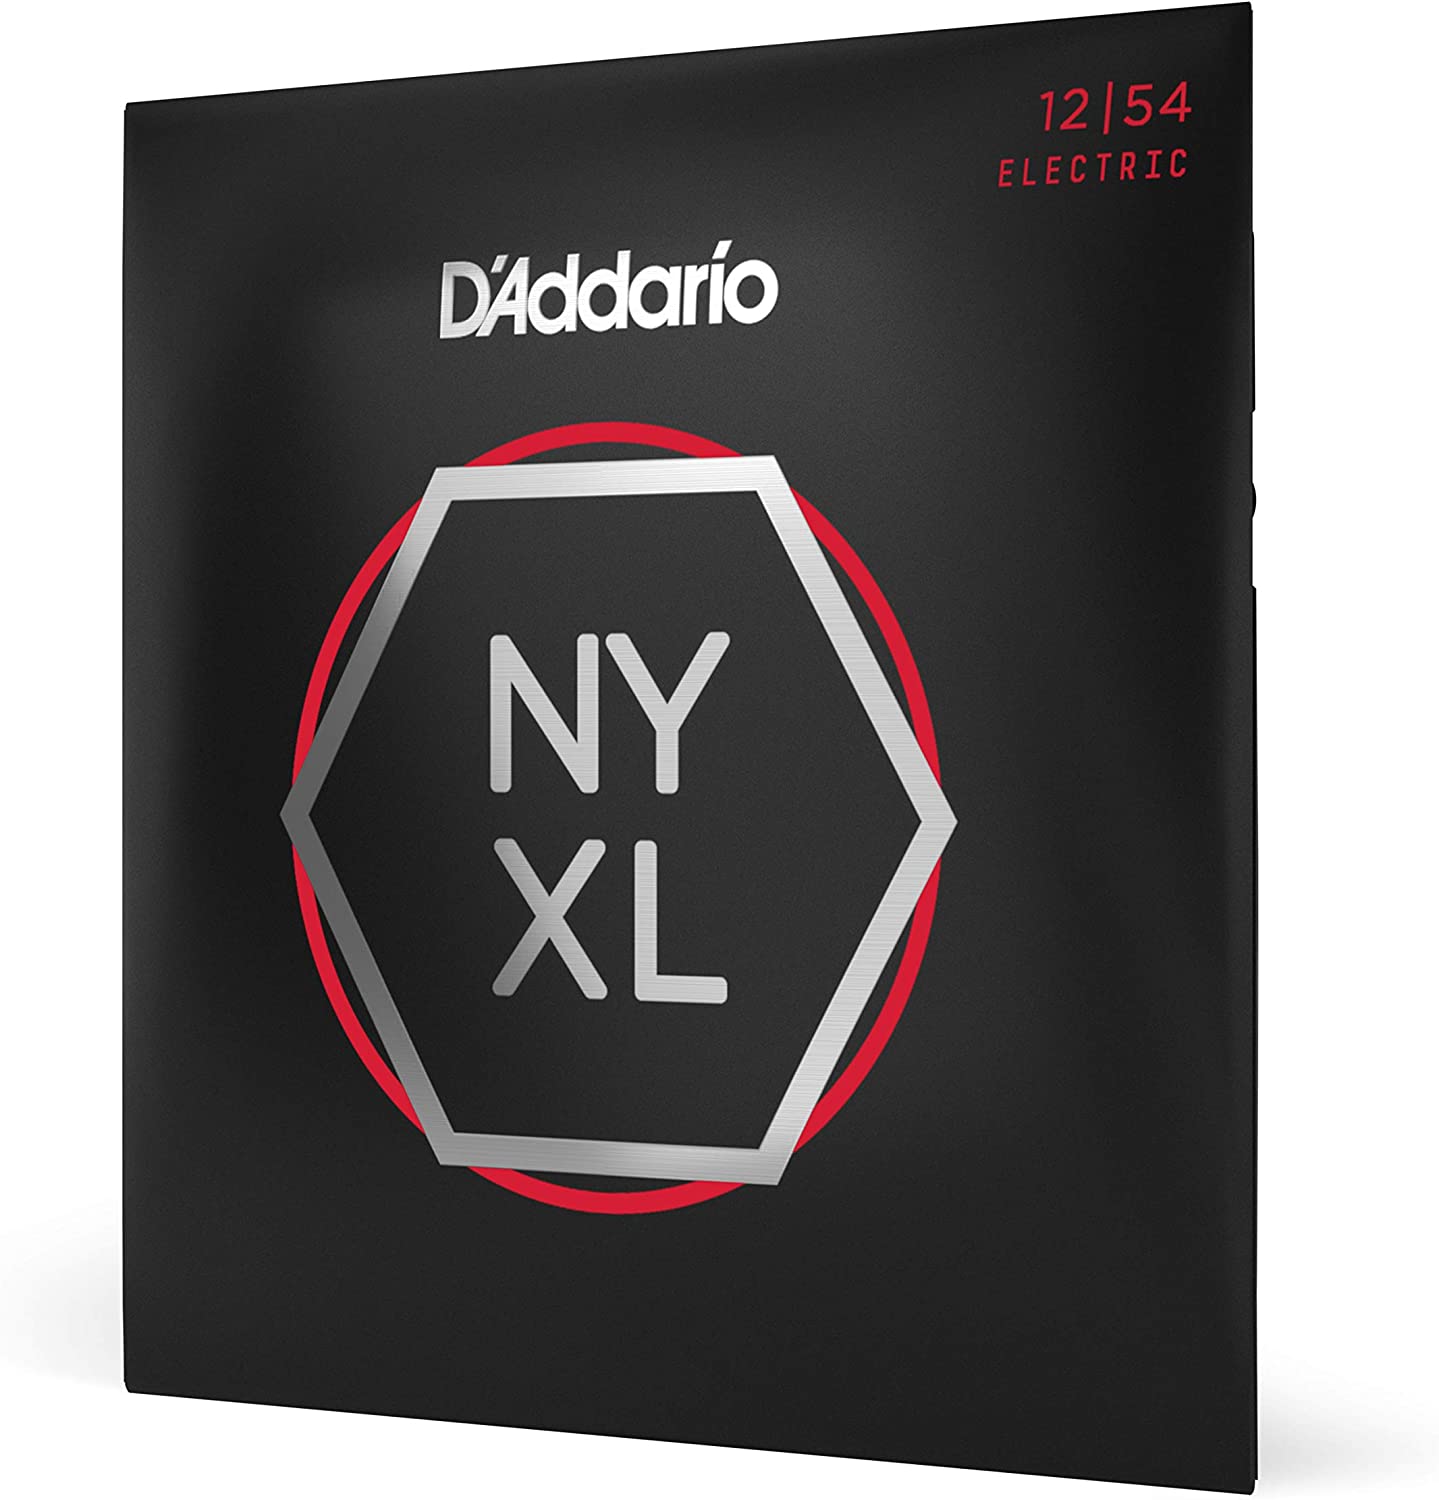 D'Addario NYXL Electric Guitar Strings on a white background